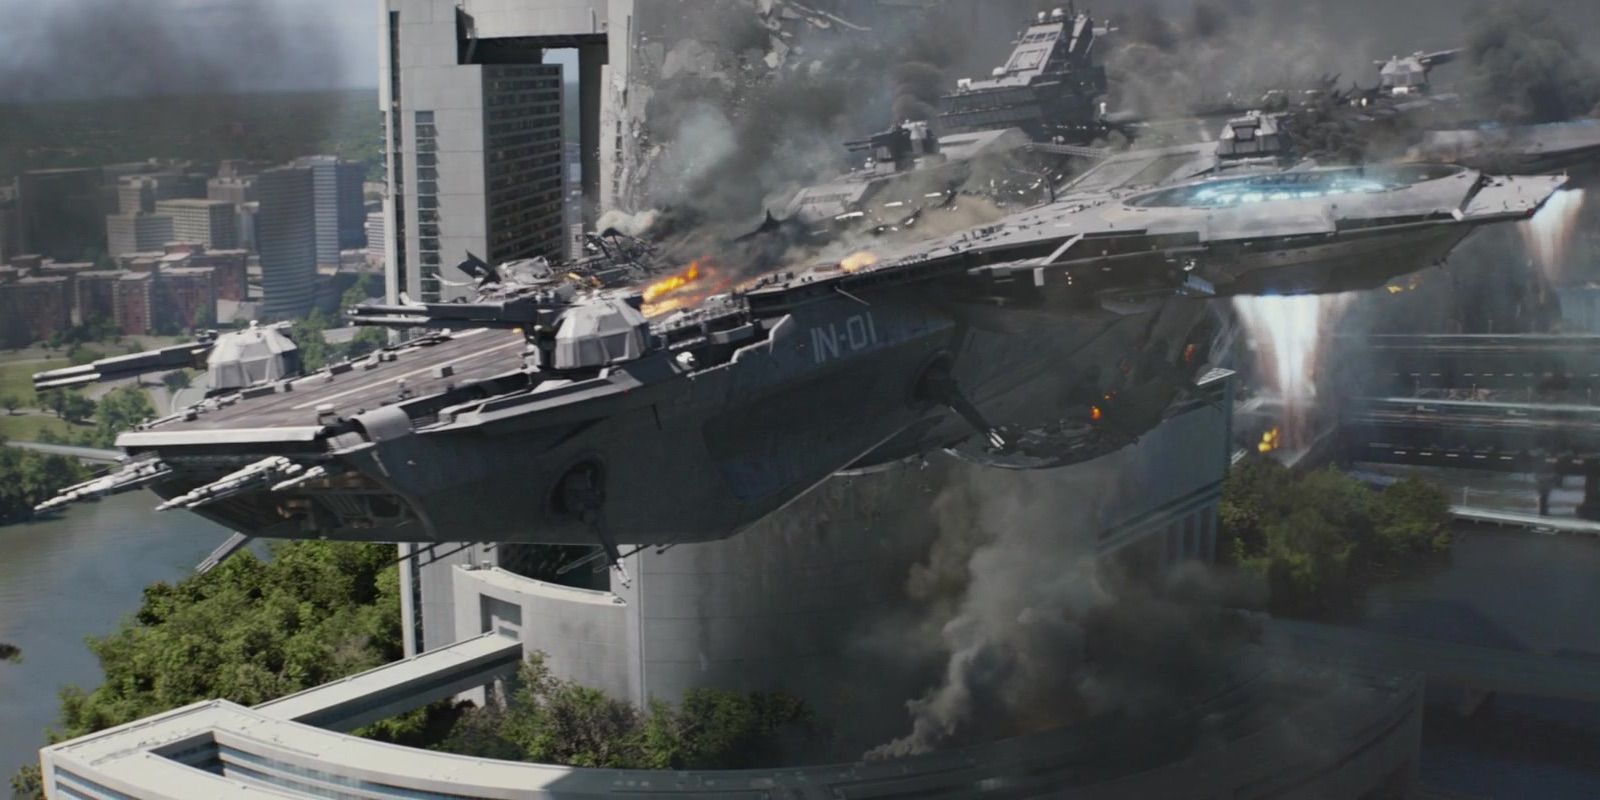 The Helicarrier crashes in Captain America: The Winter Soldier